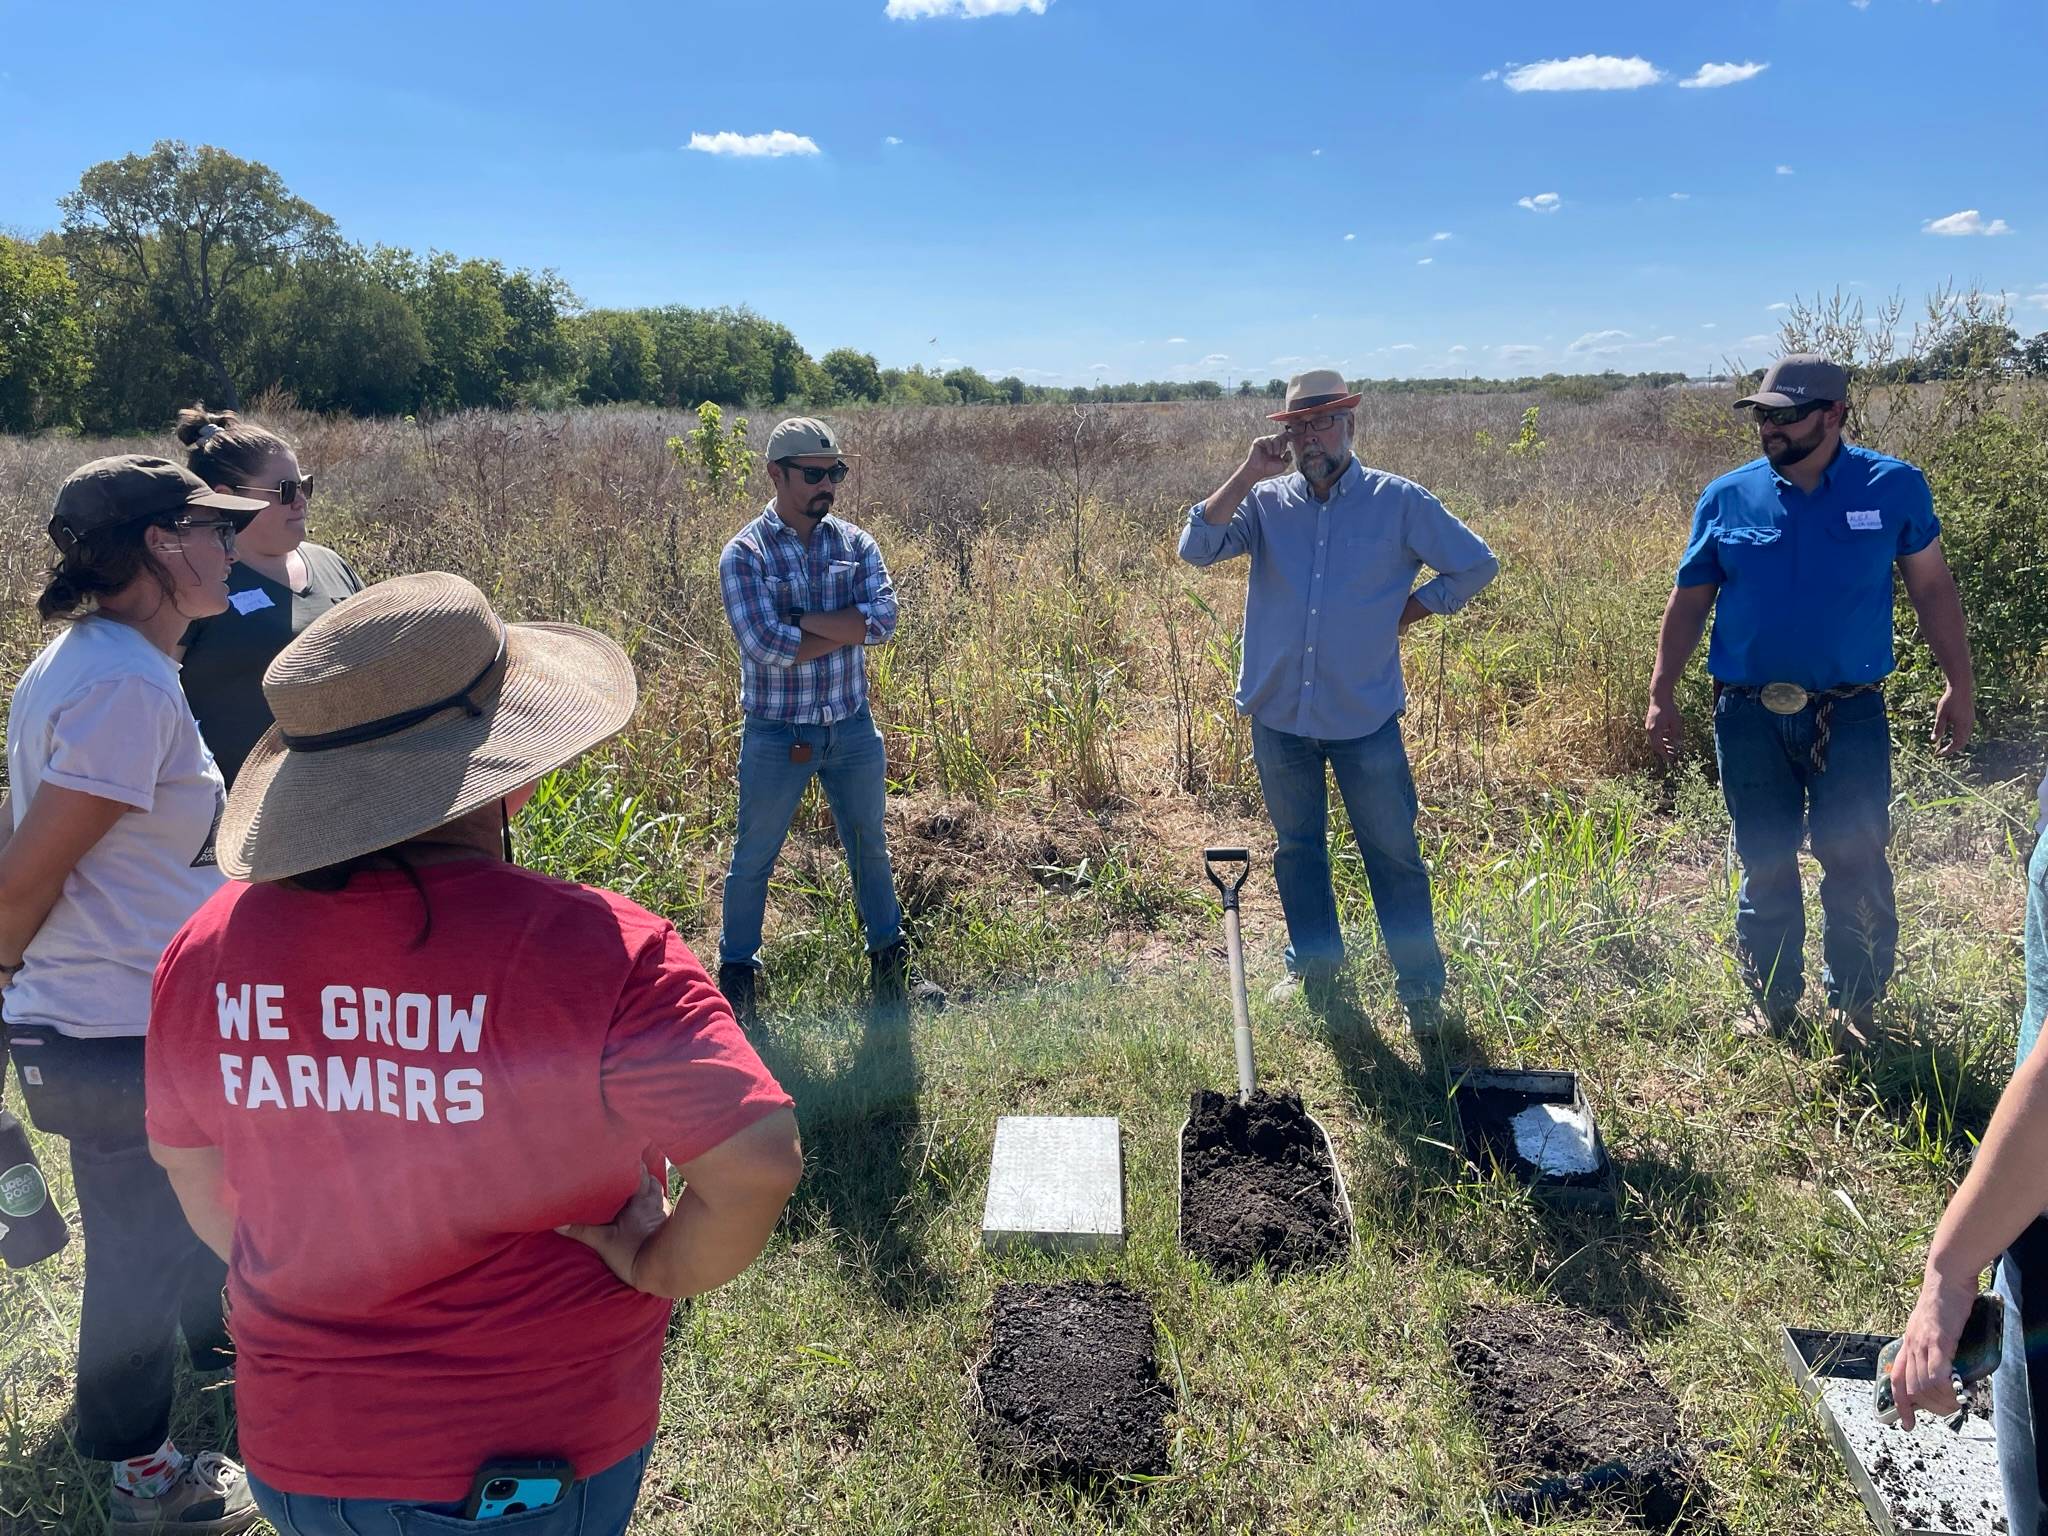 Dr. Ken Mix and workshop attendees discussing soil samples